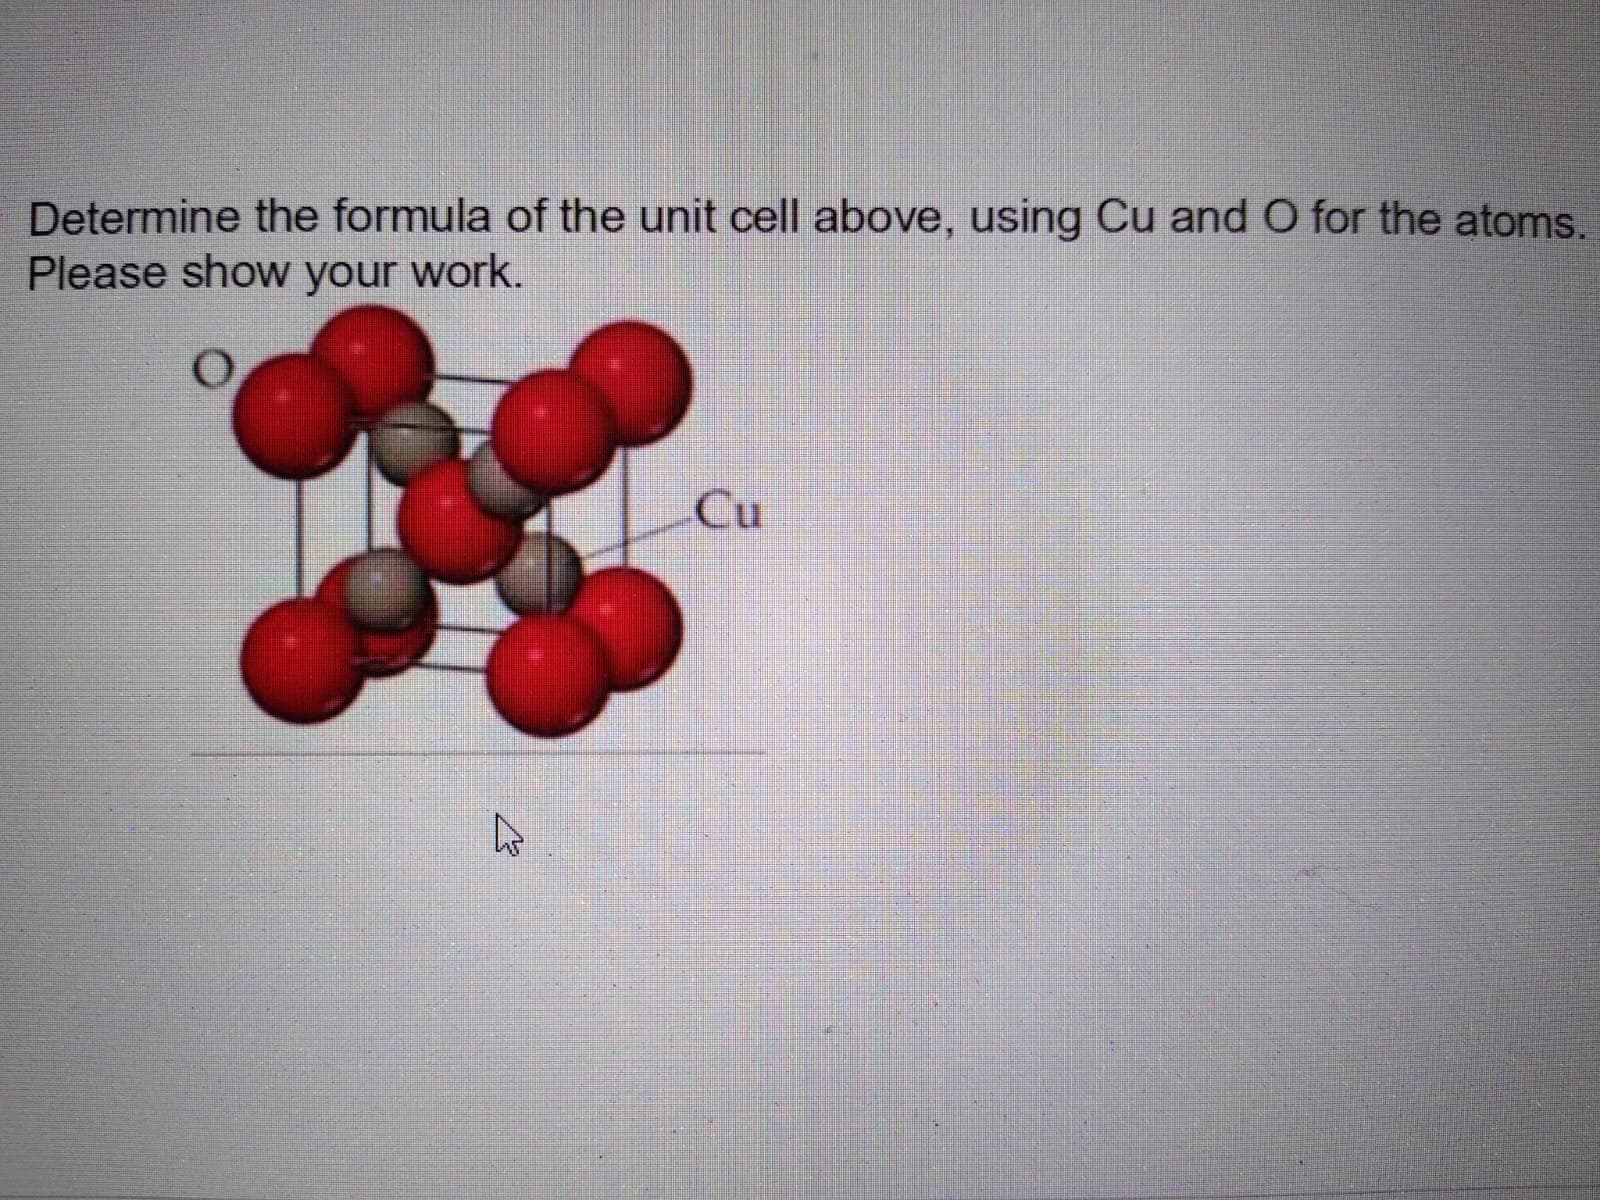 Determine the formula of the unit cell above, using Cu and O for the atoms.
Please show your work.
Cu
